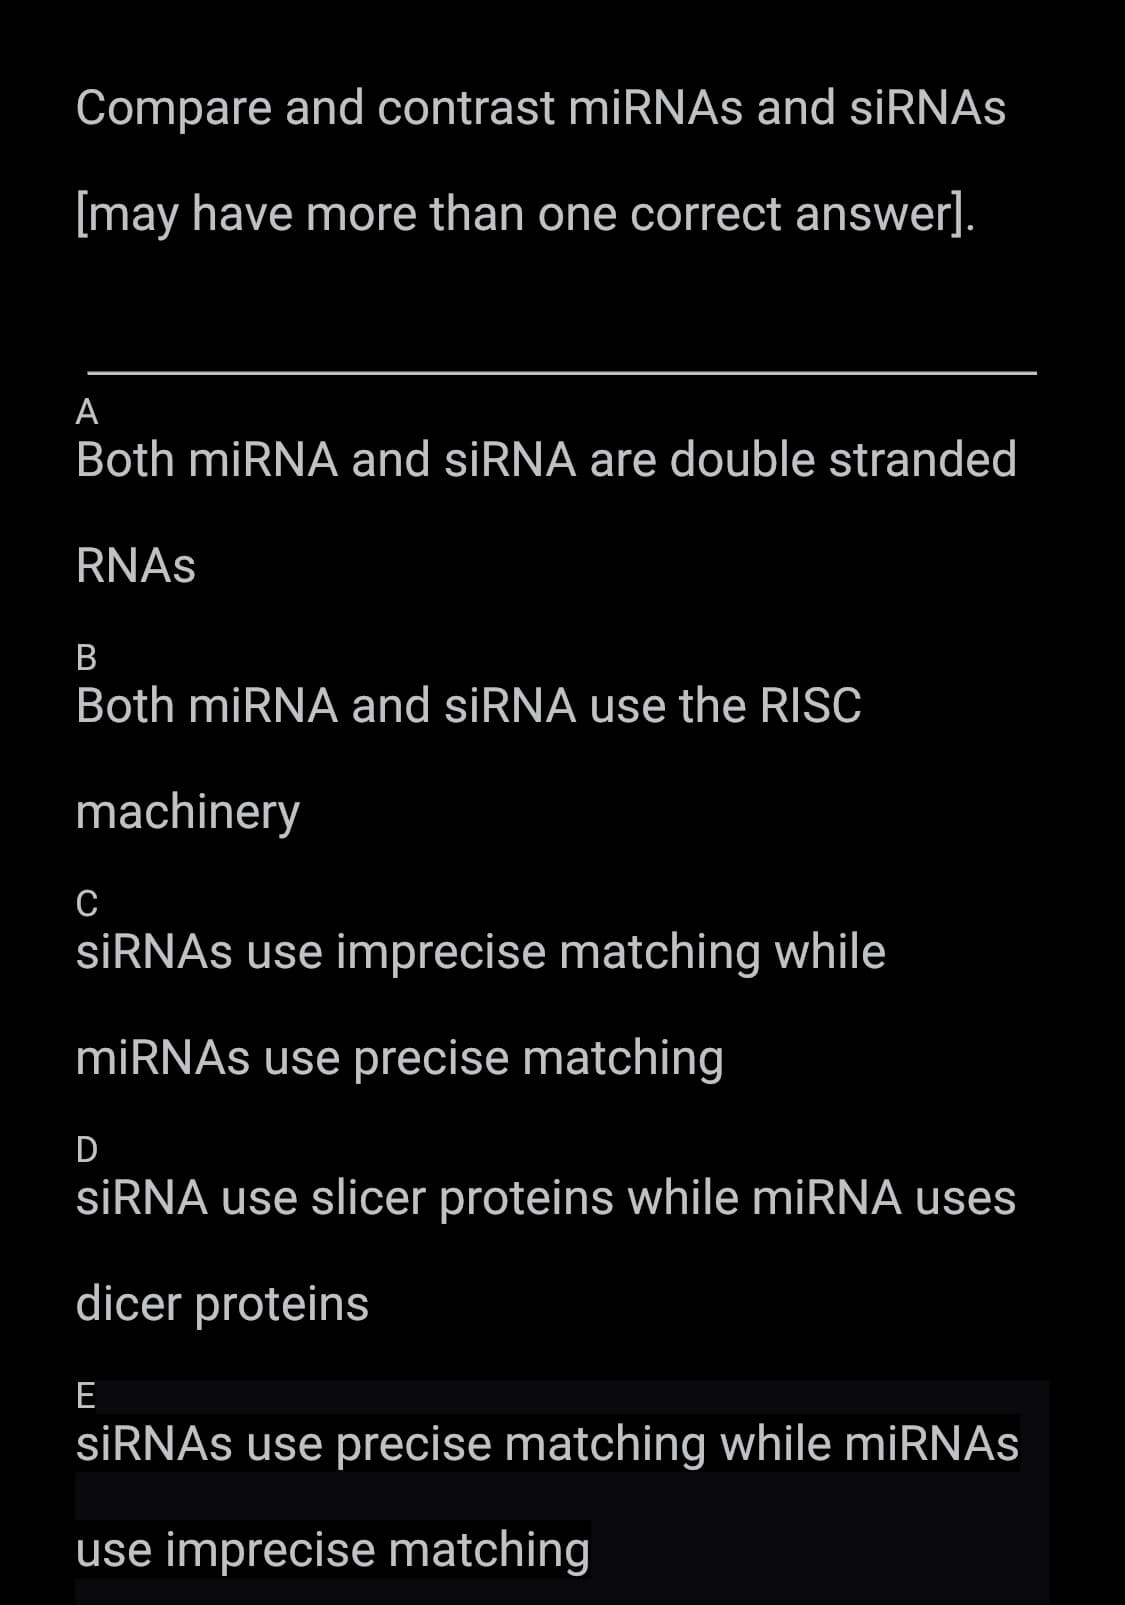 Compare and contrast miRNAs and siRNAs
[may have more than one correct answer].
A
Both miRNA and siRNA are double stranded
RNAs
B
Both miRNA and siRNA use the RISC
machinery
C
siRNAs use imprecise matching while
miRNAs use precise matching
D
siRNA use slicer proteins while miRNA uses
dicer proteins
E
siRNAs use precise matching while miRNAs
use imprecise matching